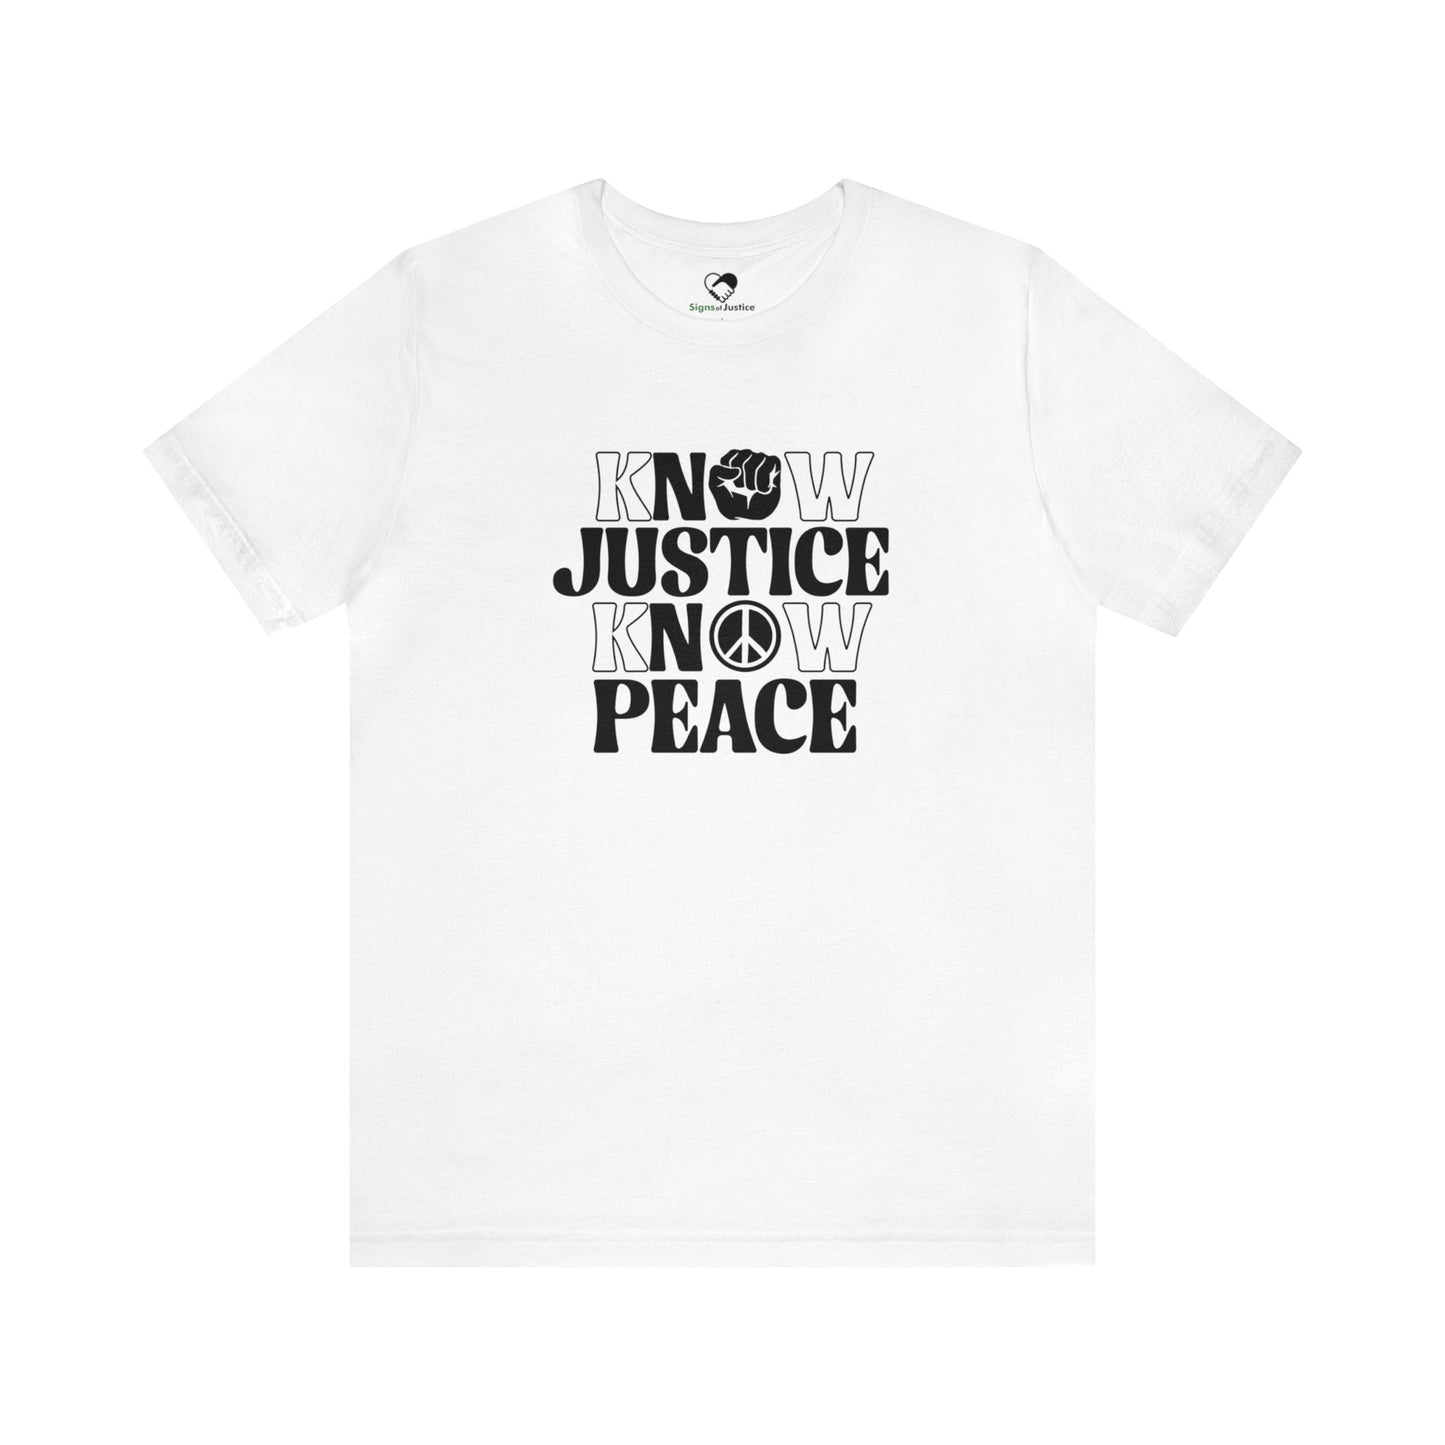 “Know Justice, Know Peace (Classic)” Unisex T-Shirt (Bella+Canvas)